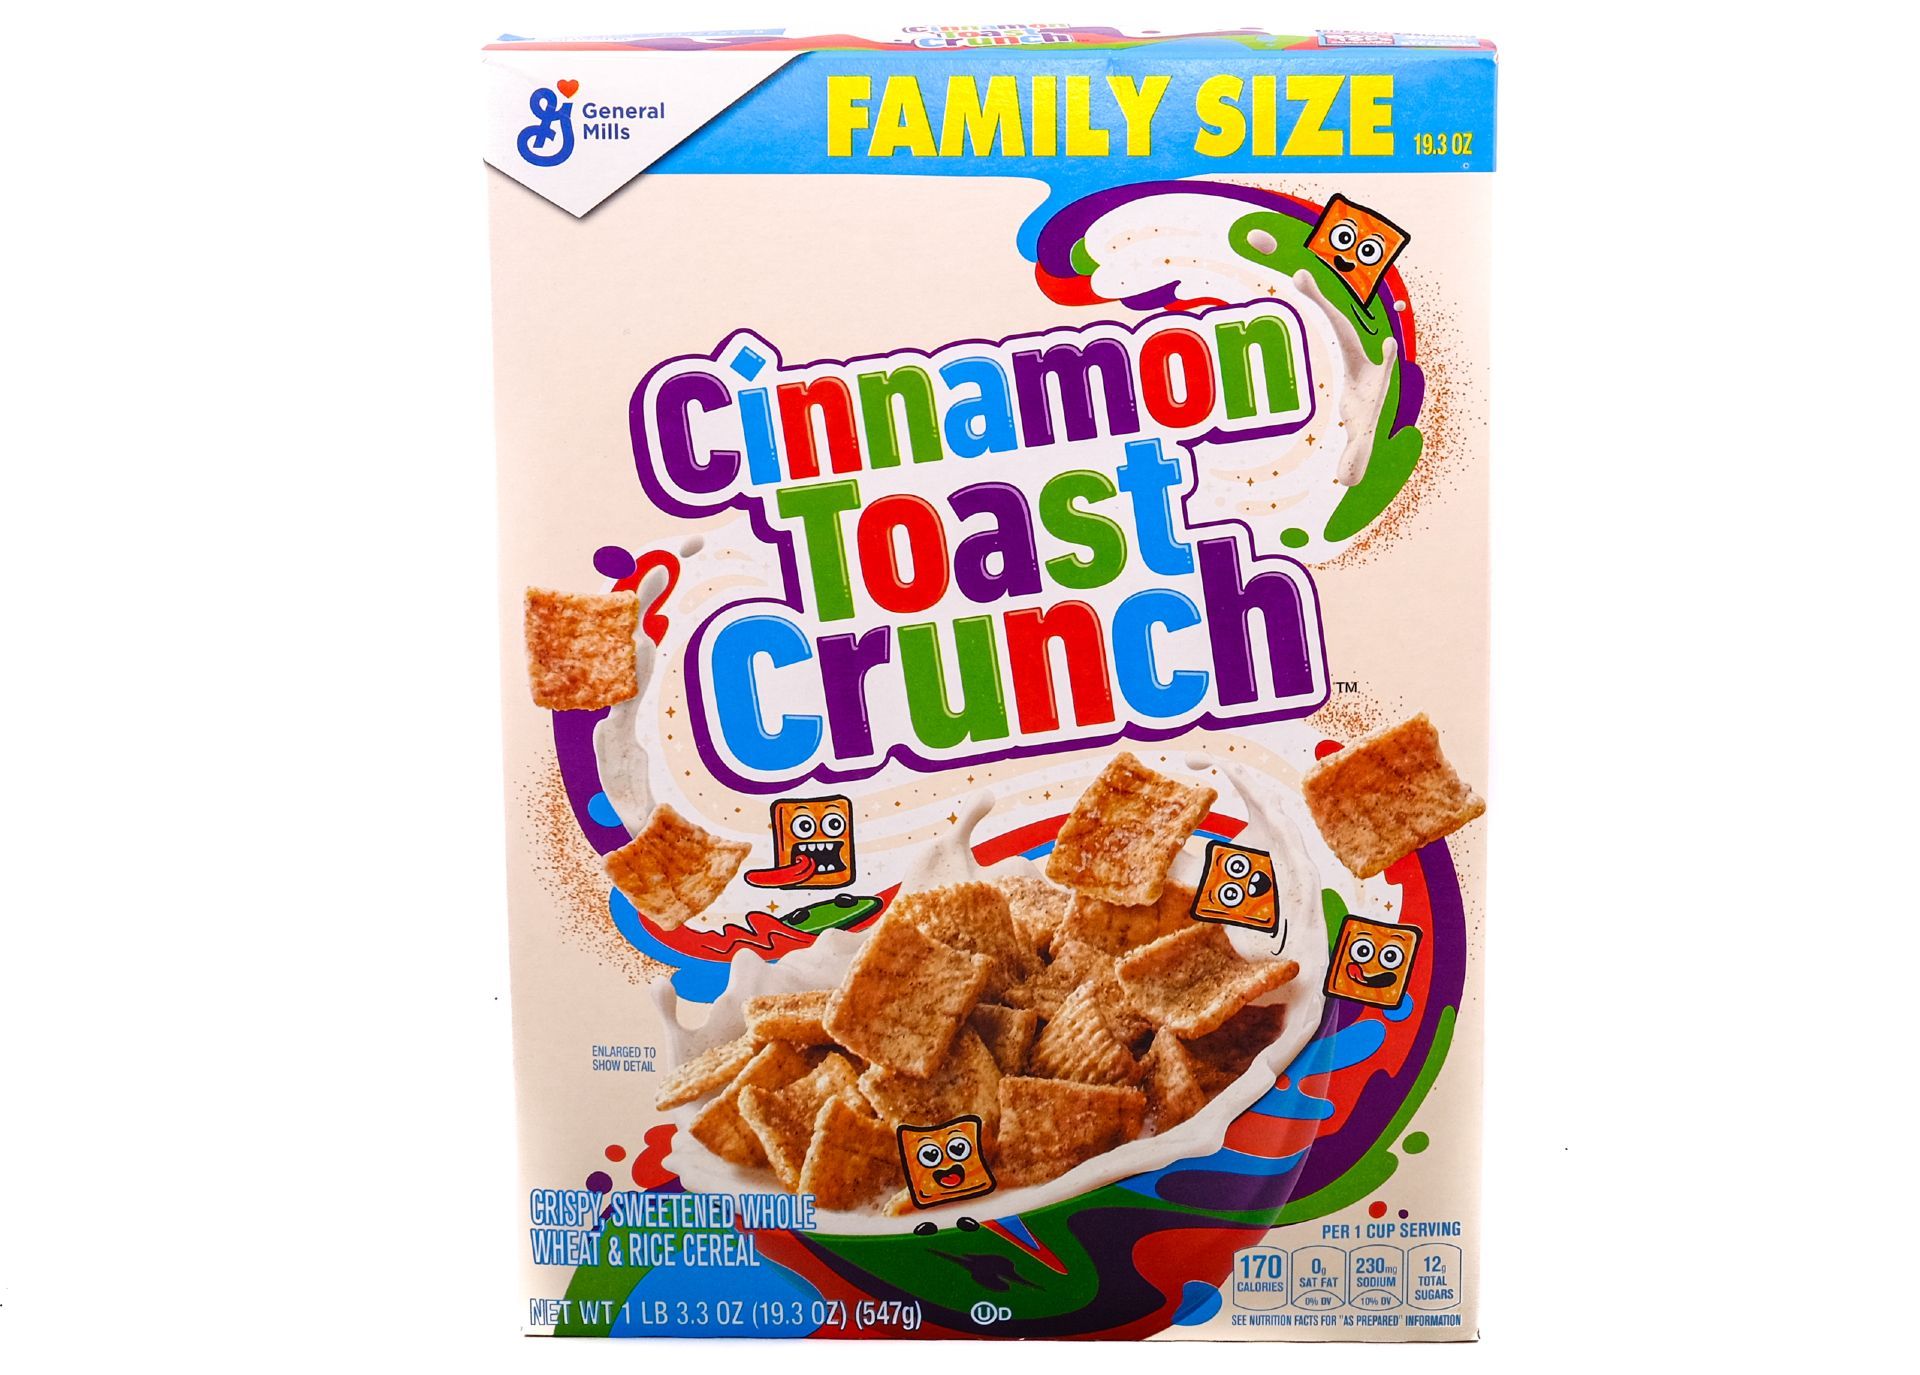 A family-size box of Cinnamon Toast Crunch cereal